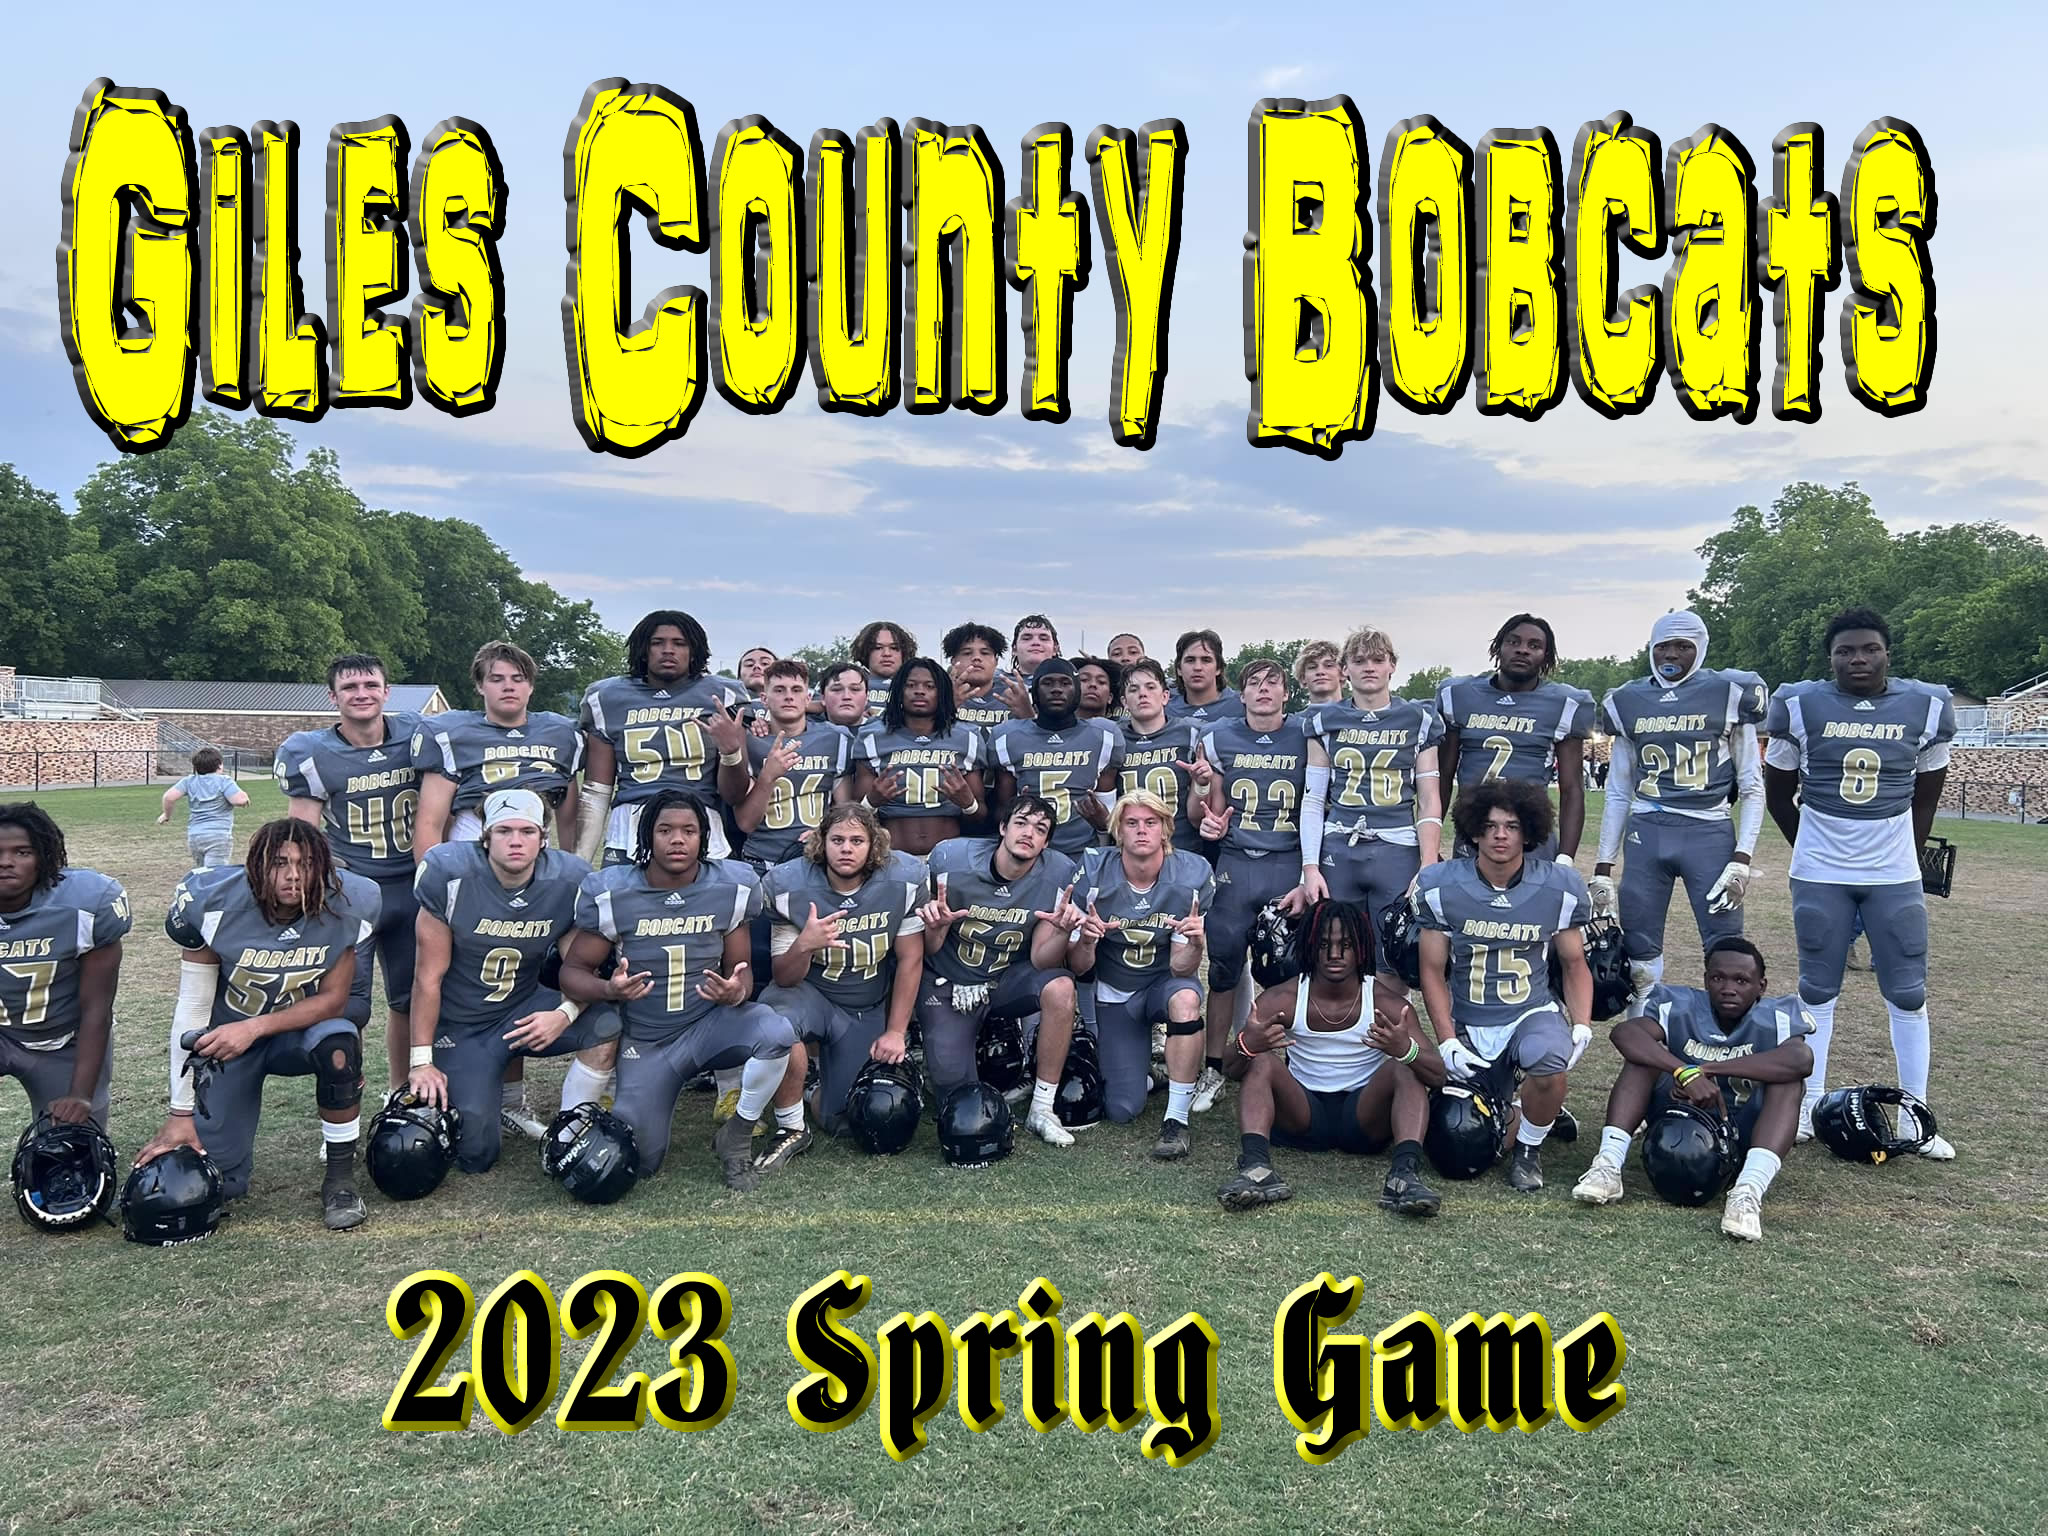 Bobcats Football Team Picture after 2023 Spring Game